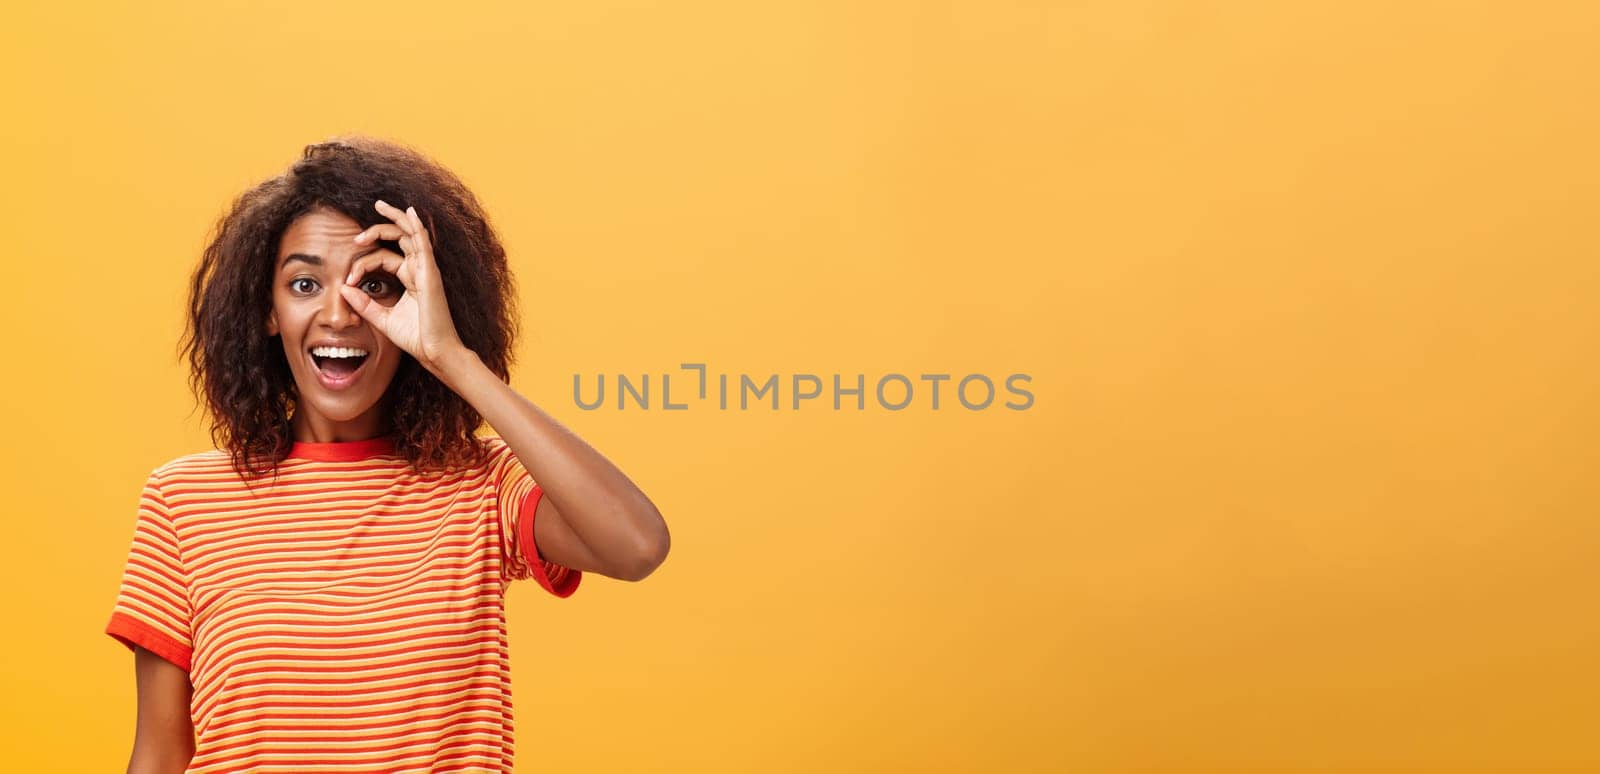 Creative and playful dreamy dark-skinned adult girl with curly hairstyle in striped t-shirt showing circle over eye or okay gesture smiling broadly ready take part in adventures near orange wall. Lifestyle.